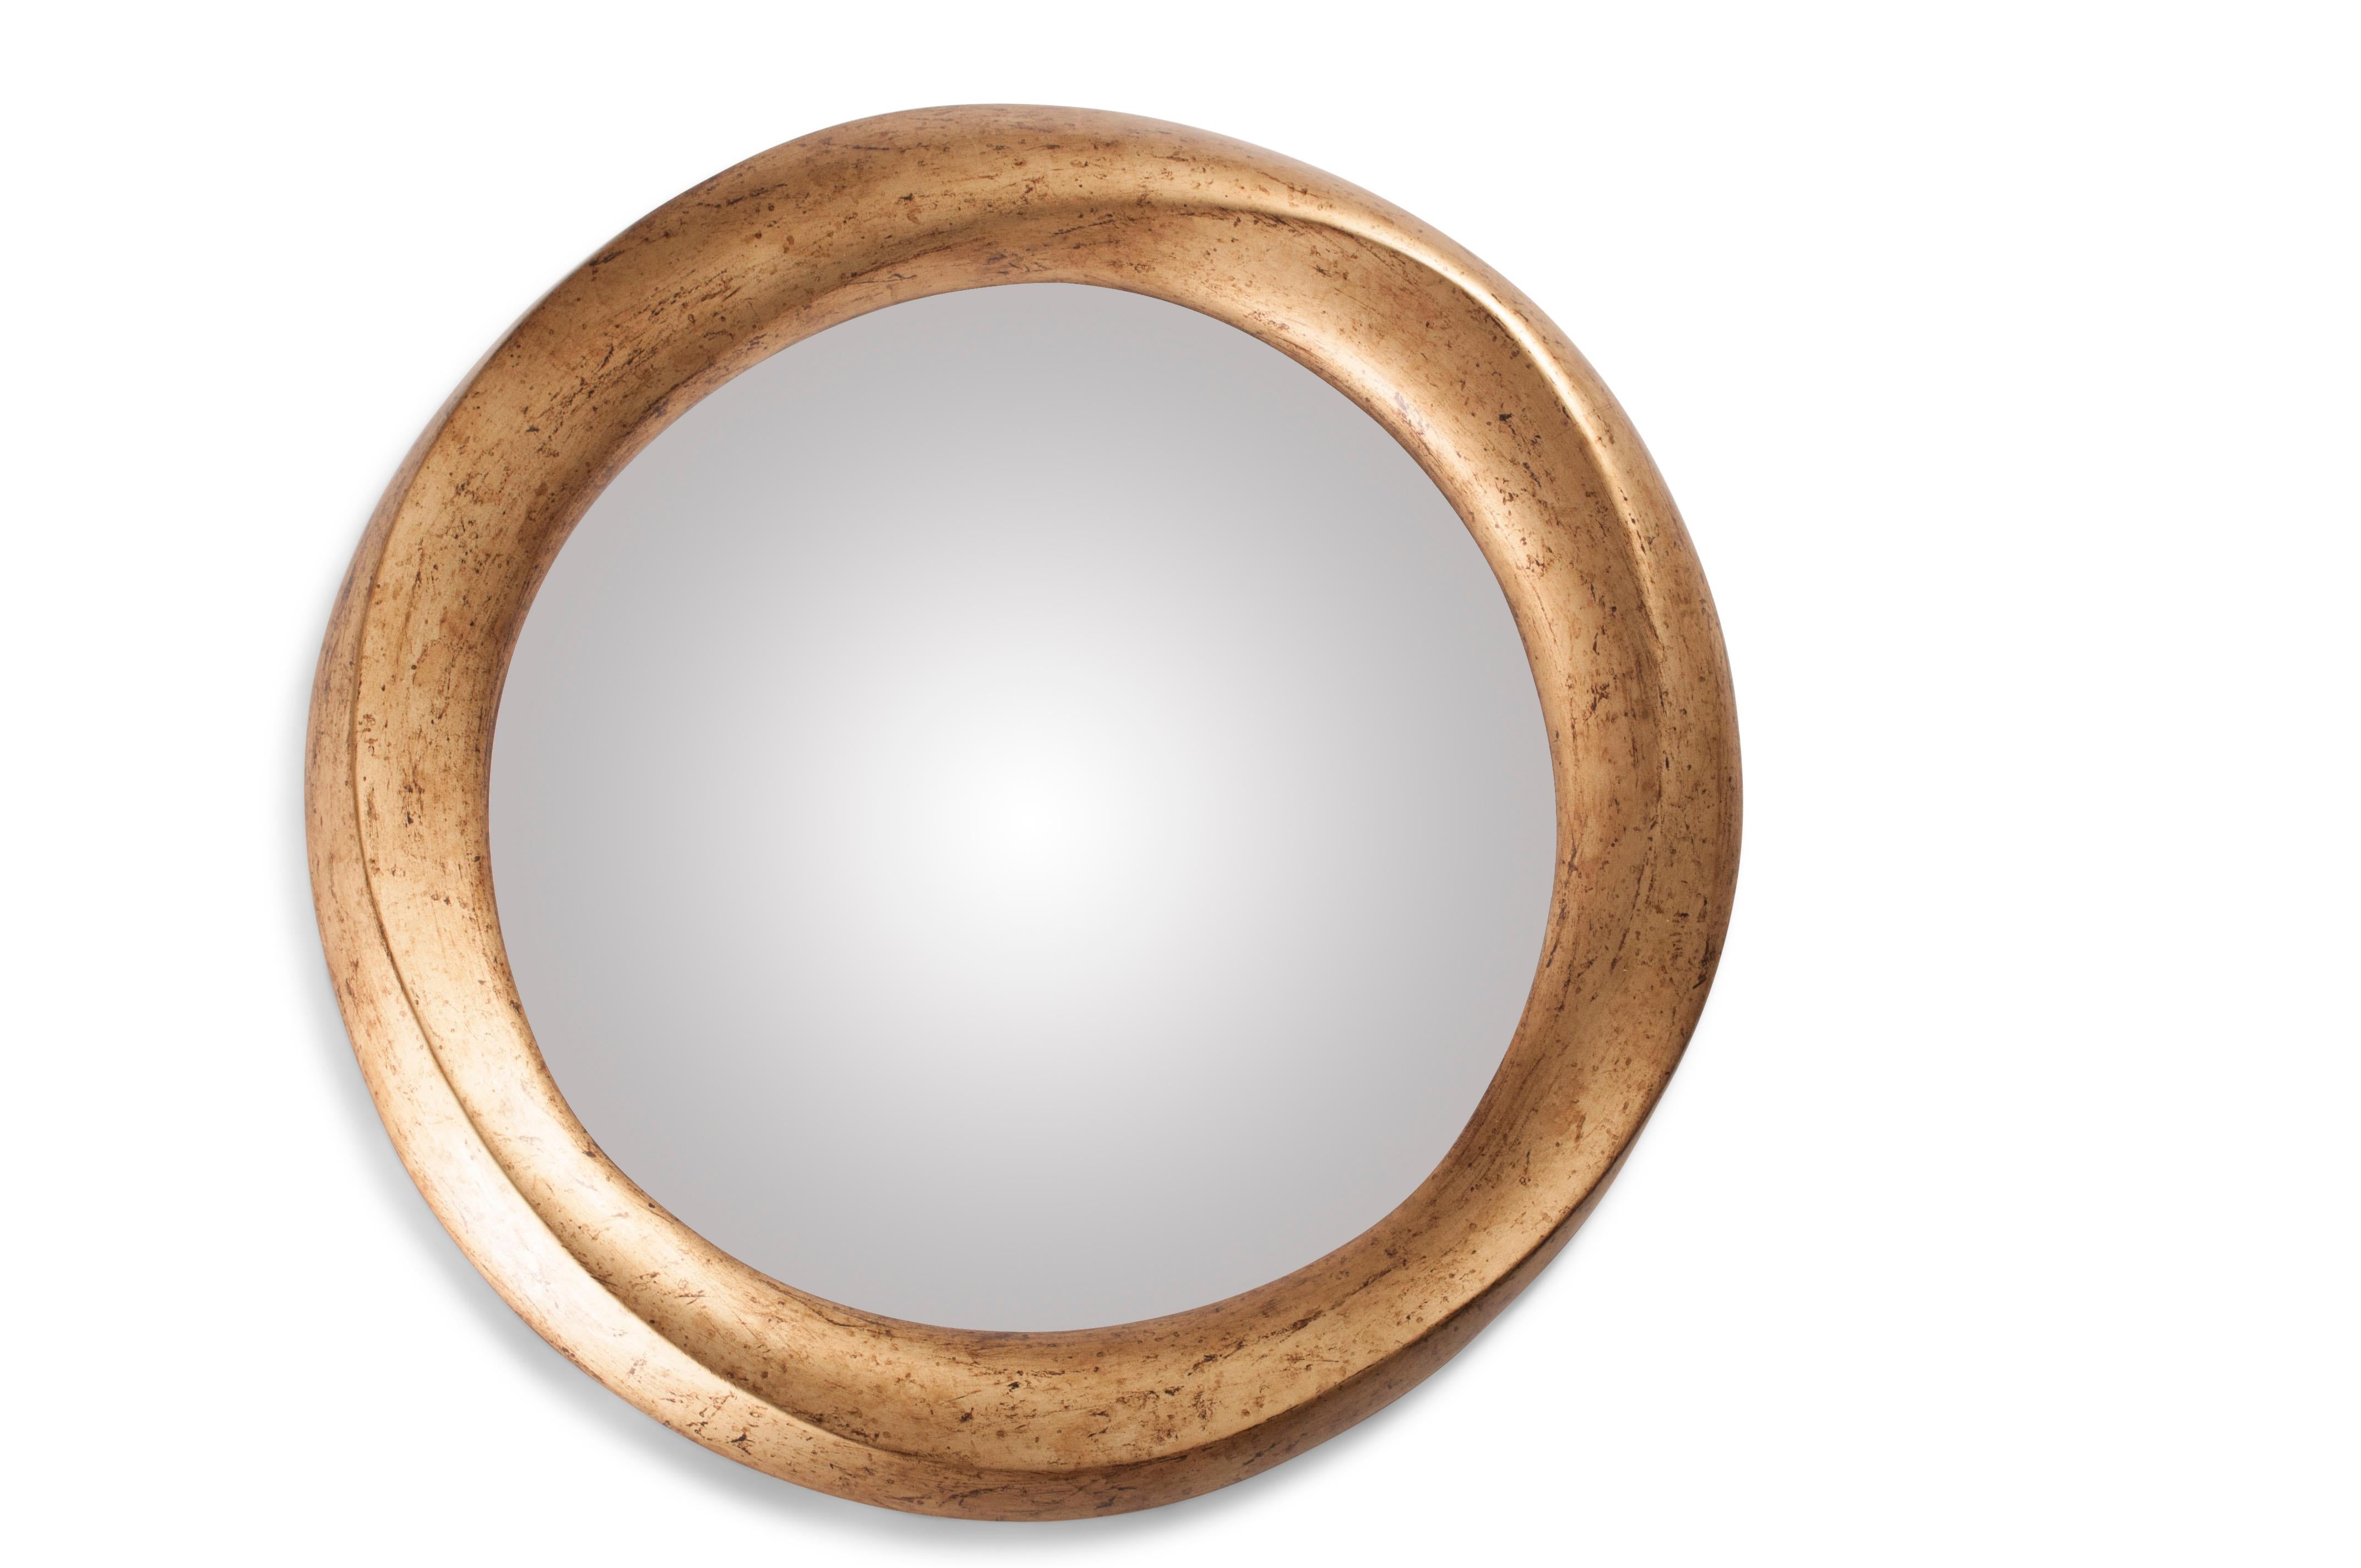 Round shape mirror with dimension of 30